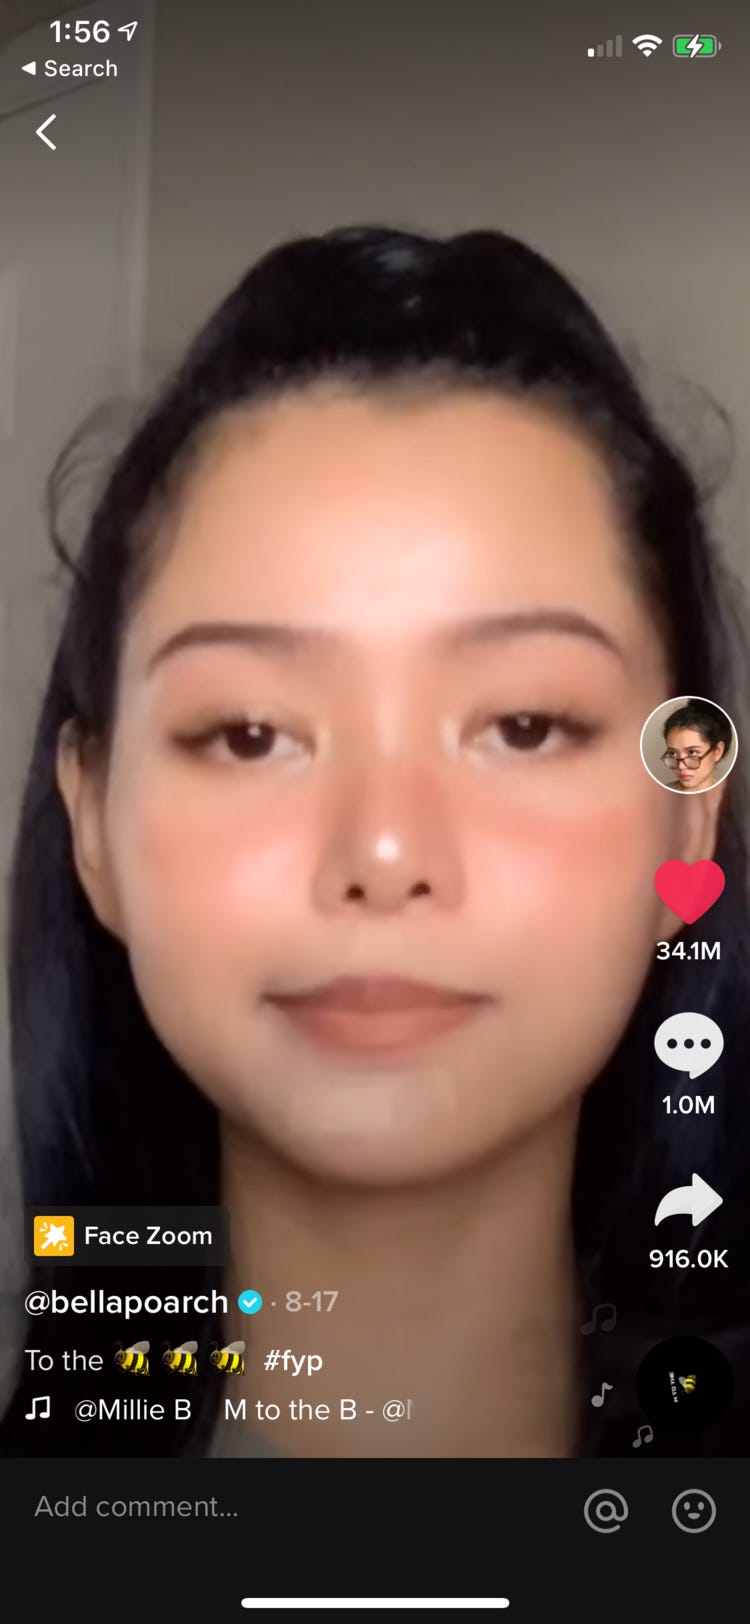 This  is, as of right now, the most popular TikTok ever. By the time I publish this post, its 34.1M likes will likely be outdated. You can read  the story of how this TikTok even came to be  and it will still feel like a cultural conundrum wrapped in a riddle stuffed in a paradox, and you love to see it. I showed this to my niece, we looped it a few dozen times, then we started chanting “M to the B, M to the B” and laughing our asses off and it was one of the only times in this pandemic I’ve truly felt anything other than despair.